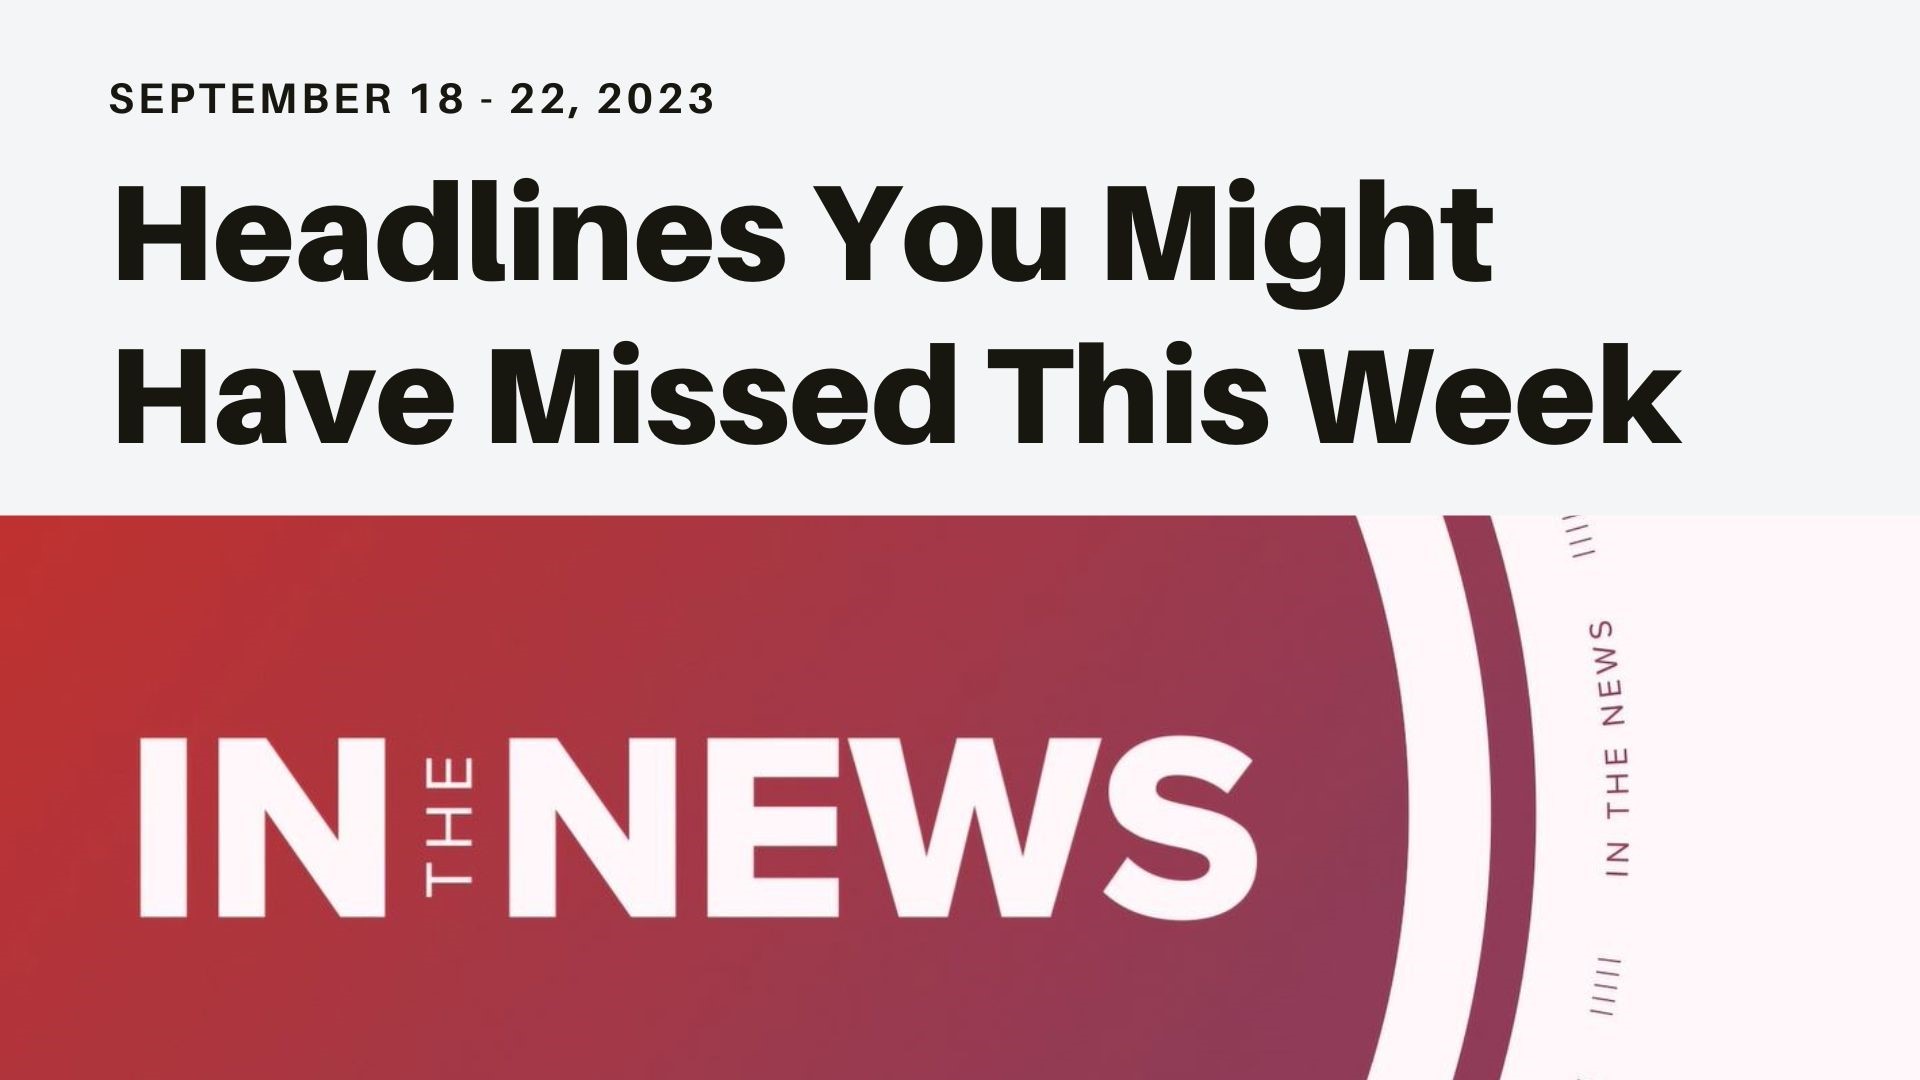 A look at some of the headlines you might have missed this week from the U.S.-Iran prisoner swap to Hunter Biden suing the IRS, free covid tests resume and more.